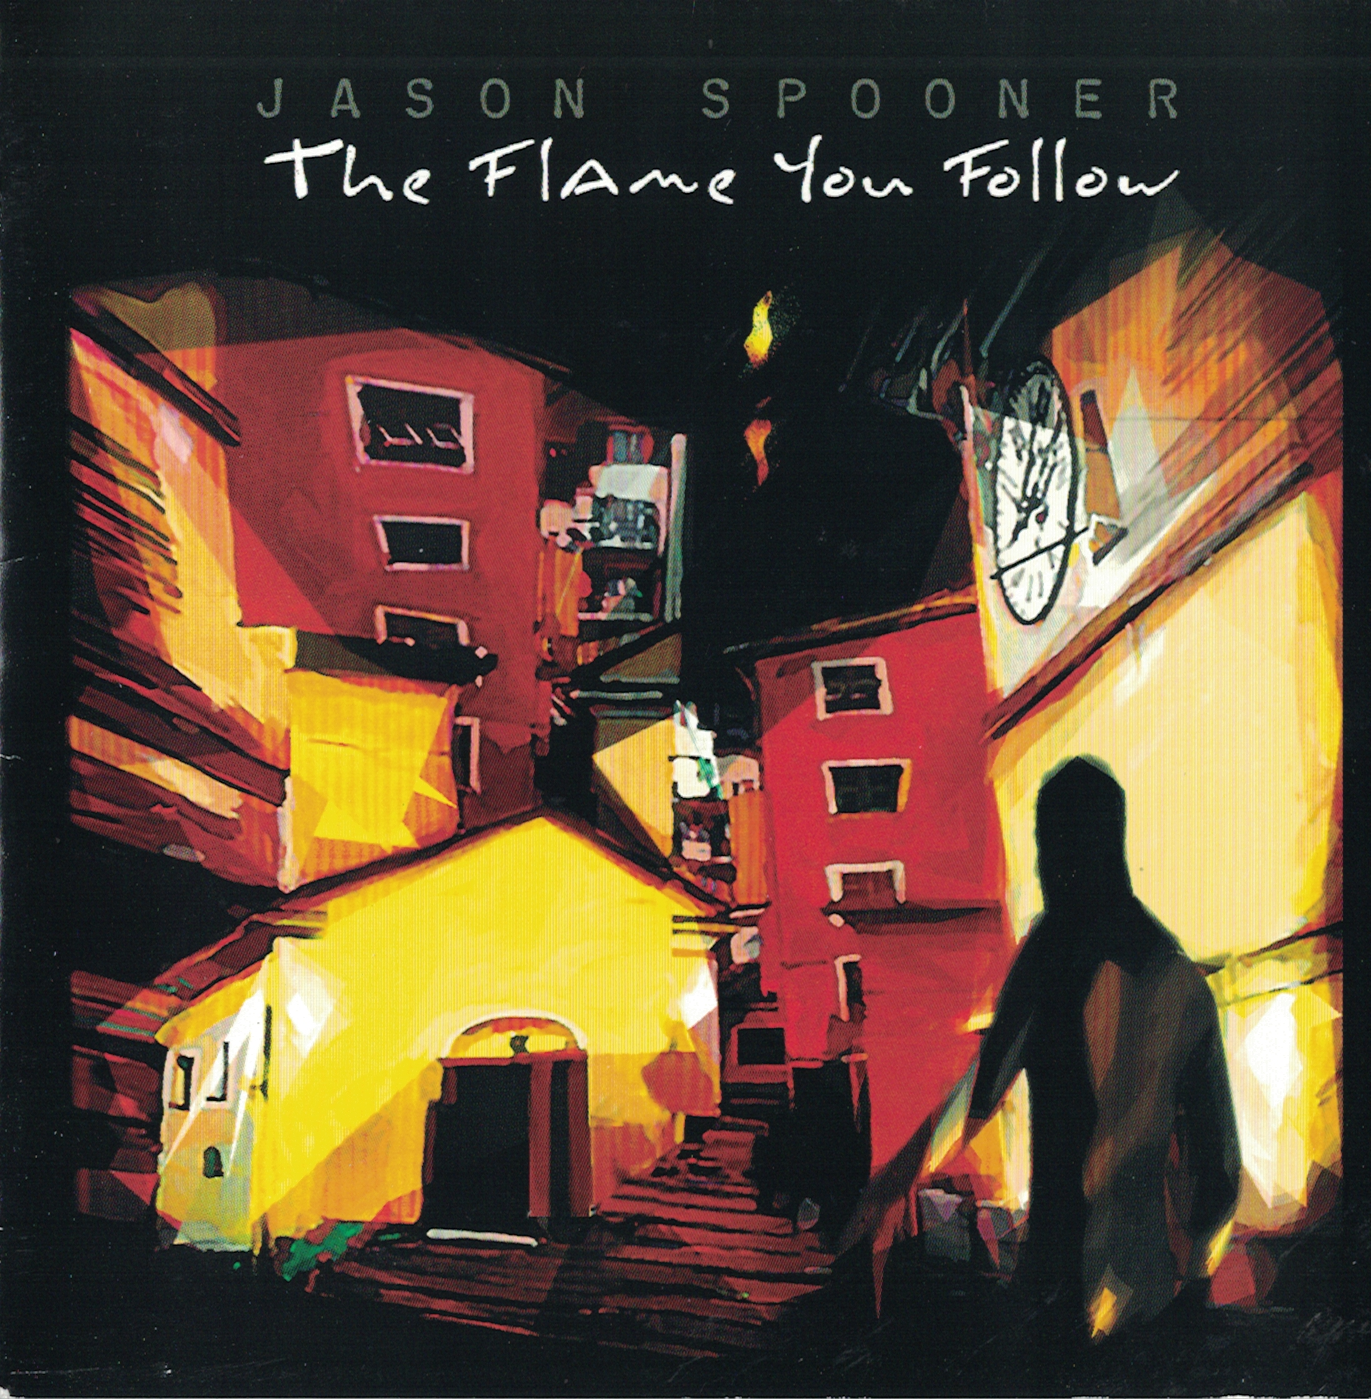 Jason Spooner - The Flame You Follow - cover art and links to song lyrics